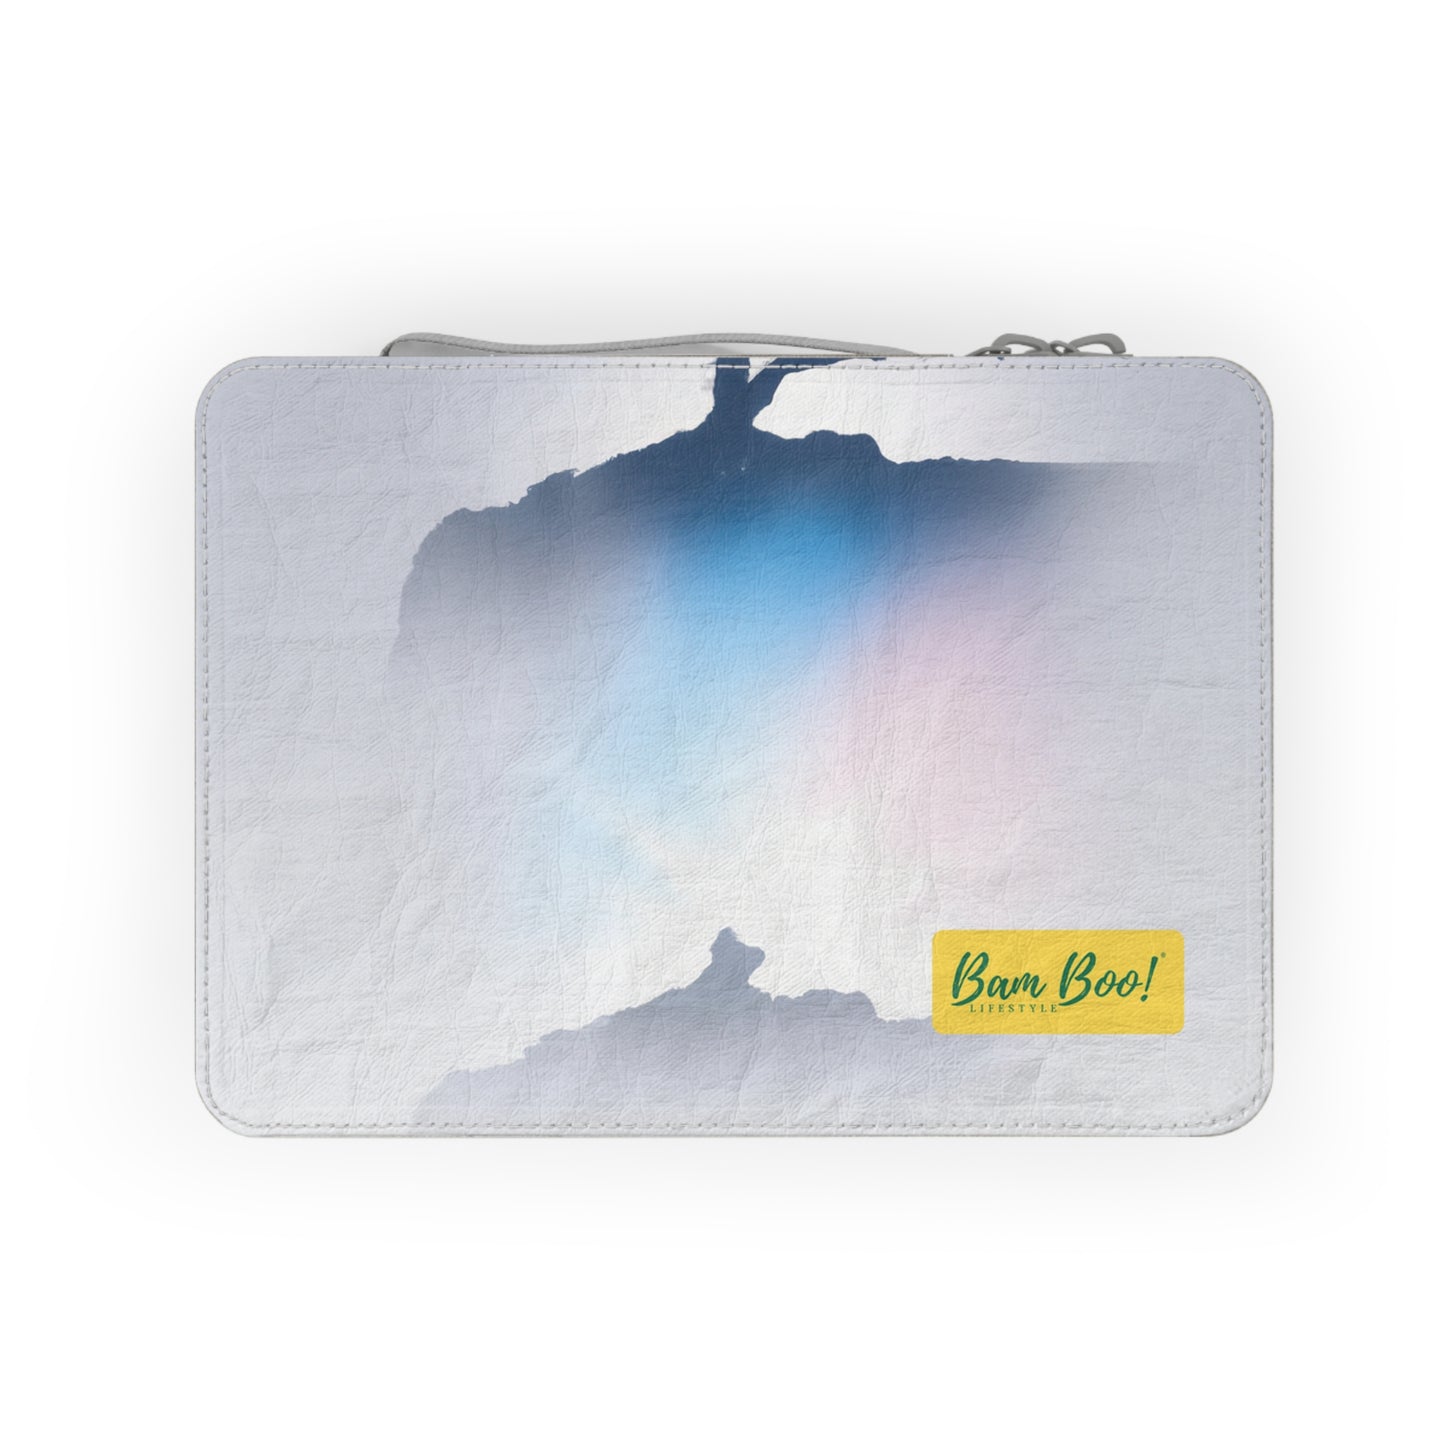 "Vibrant Earthscape" - Bam Boo! Lifestyle Eco-friendly Paper Lunch Bag